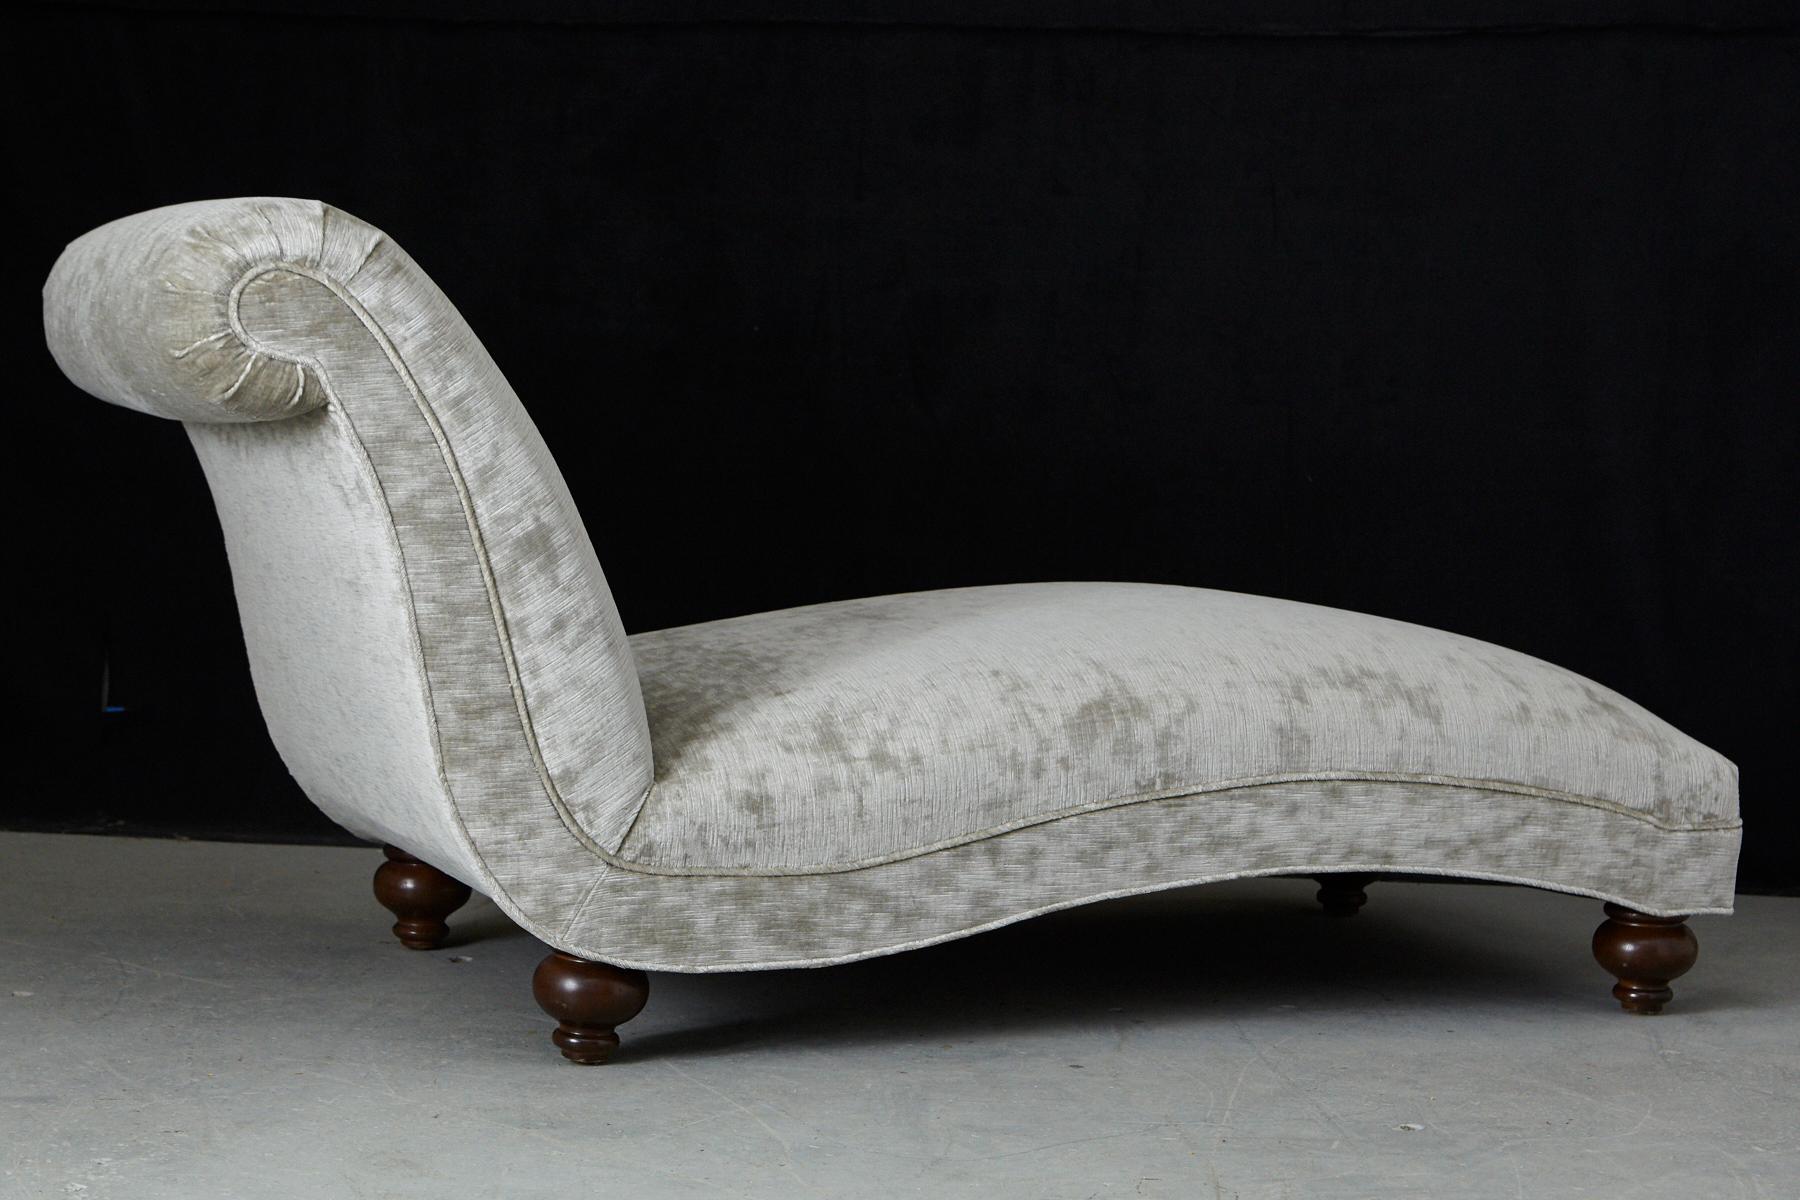 French Chaise Longue with New Upholstery in Striae Velvet, circa 1930s For Sale 4